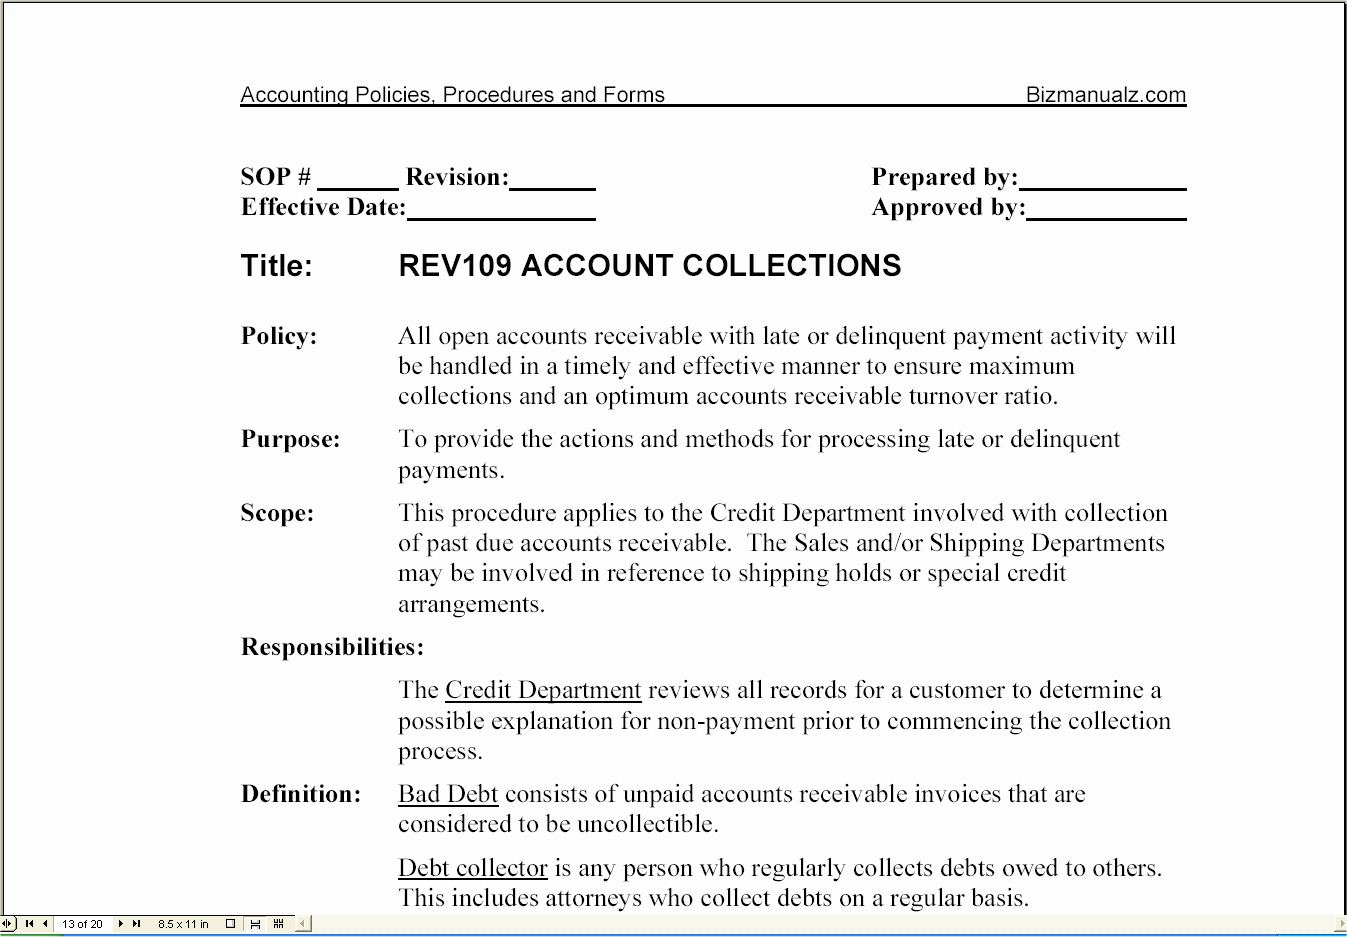 Accounting Policies and Procedures Template Beautiful Bizmanualz Accounting Policies Procedures and forms Mbaware